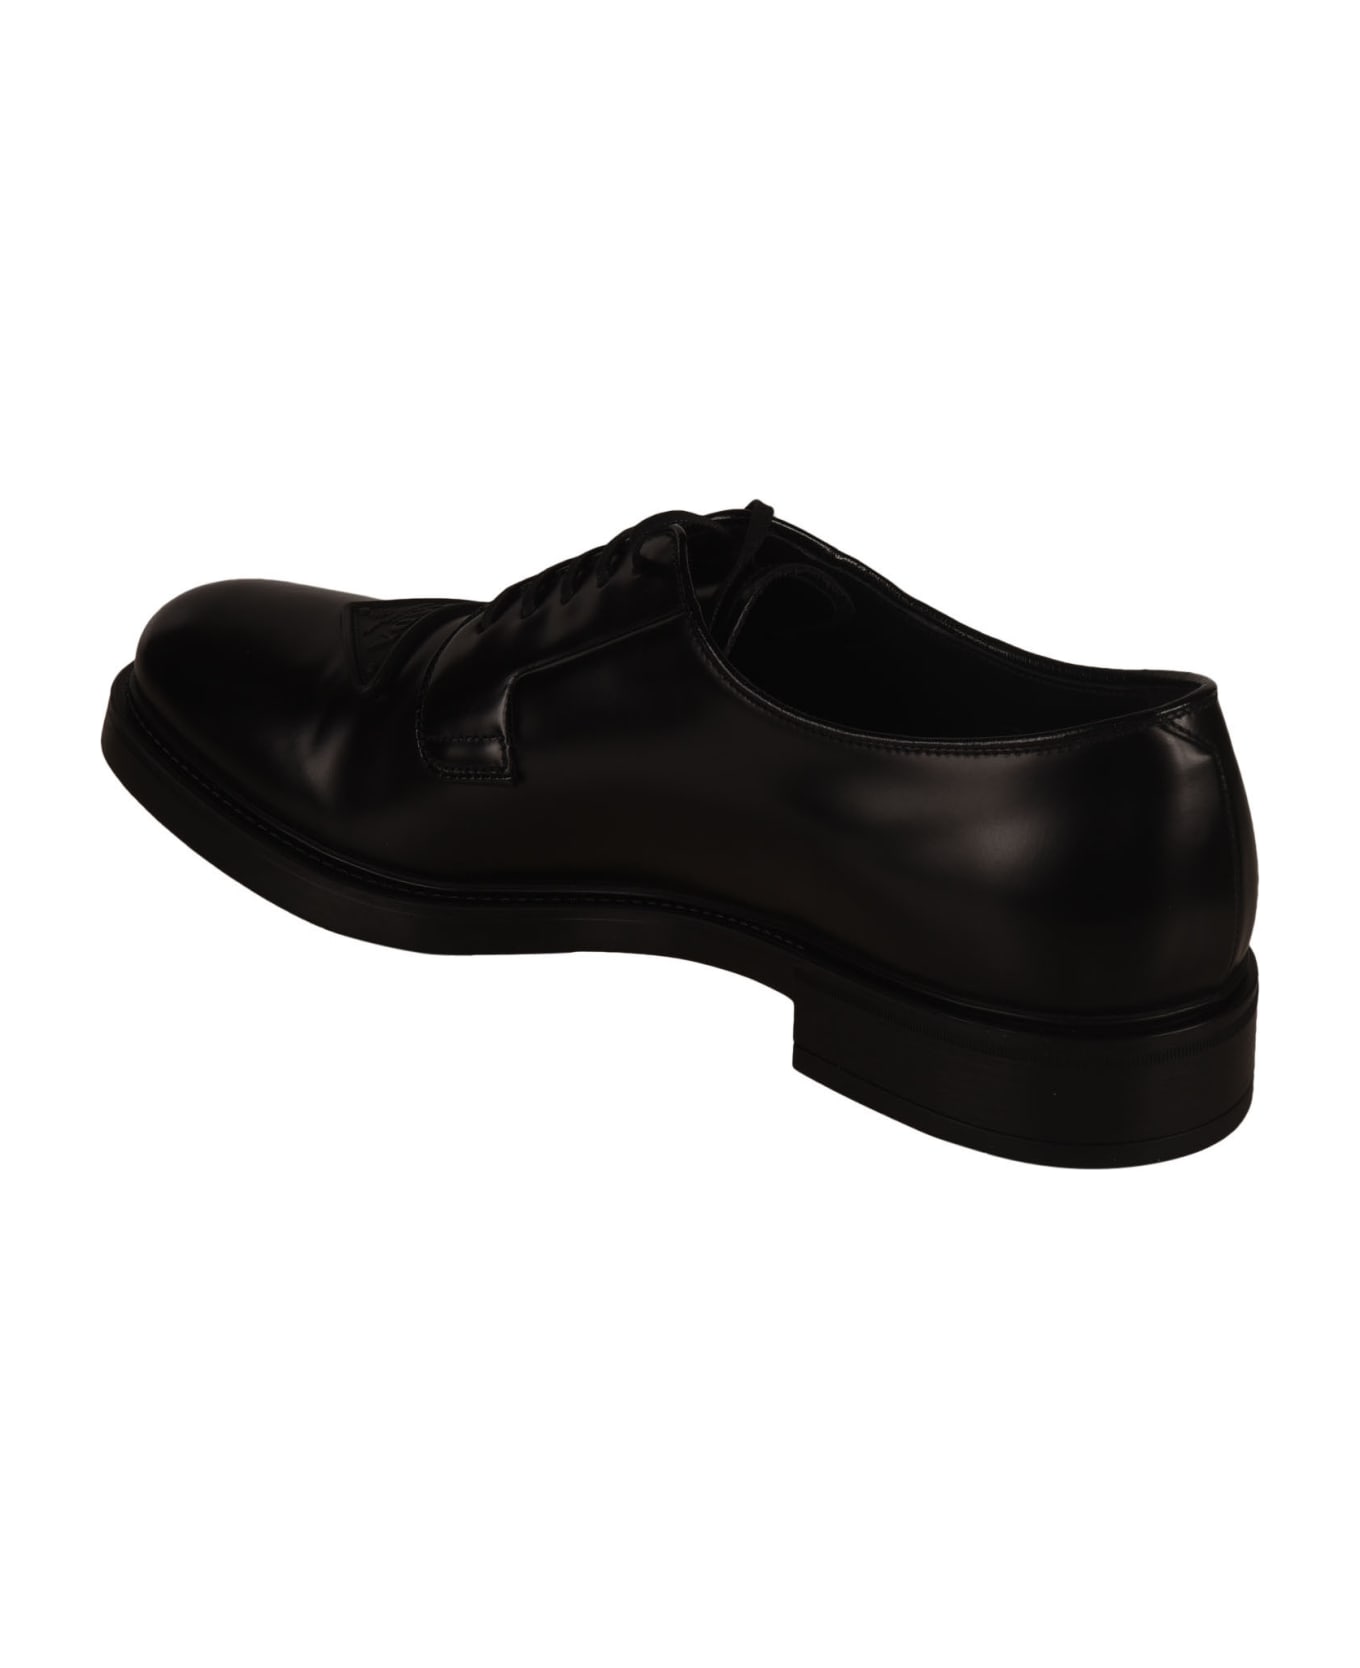 Prada Logo Patched Derby what Shoes - Black